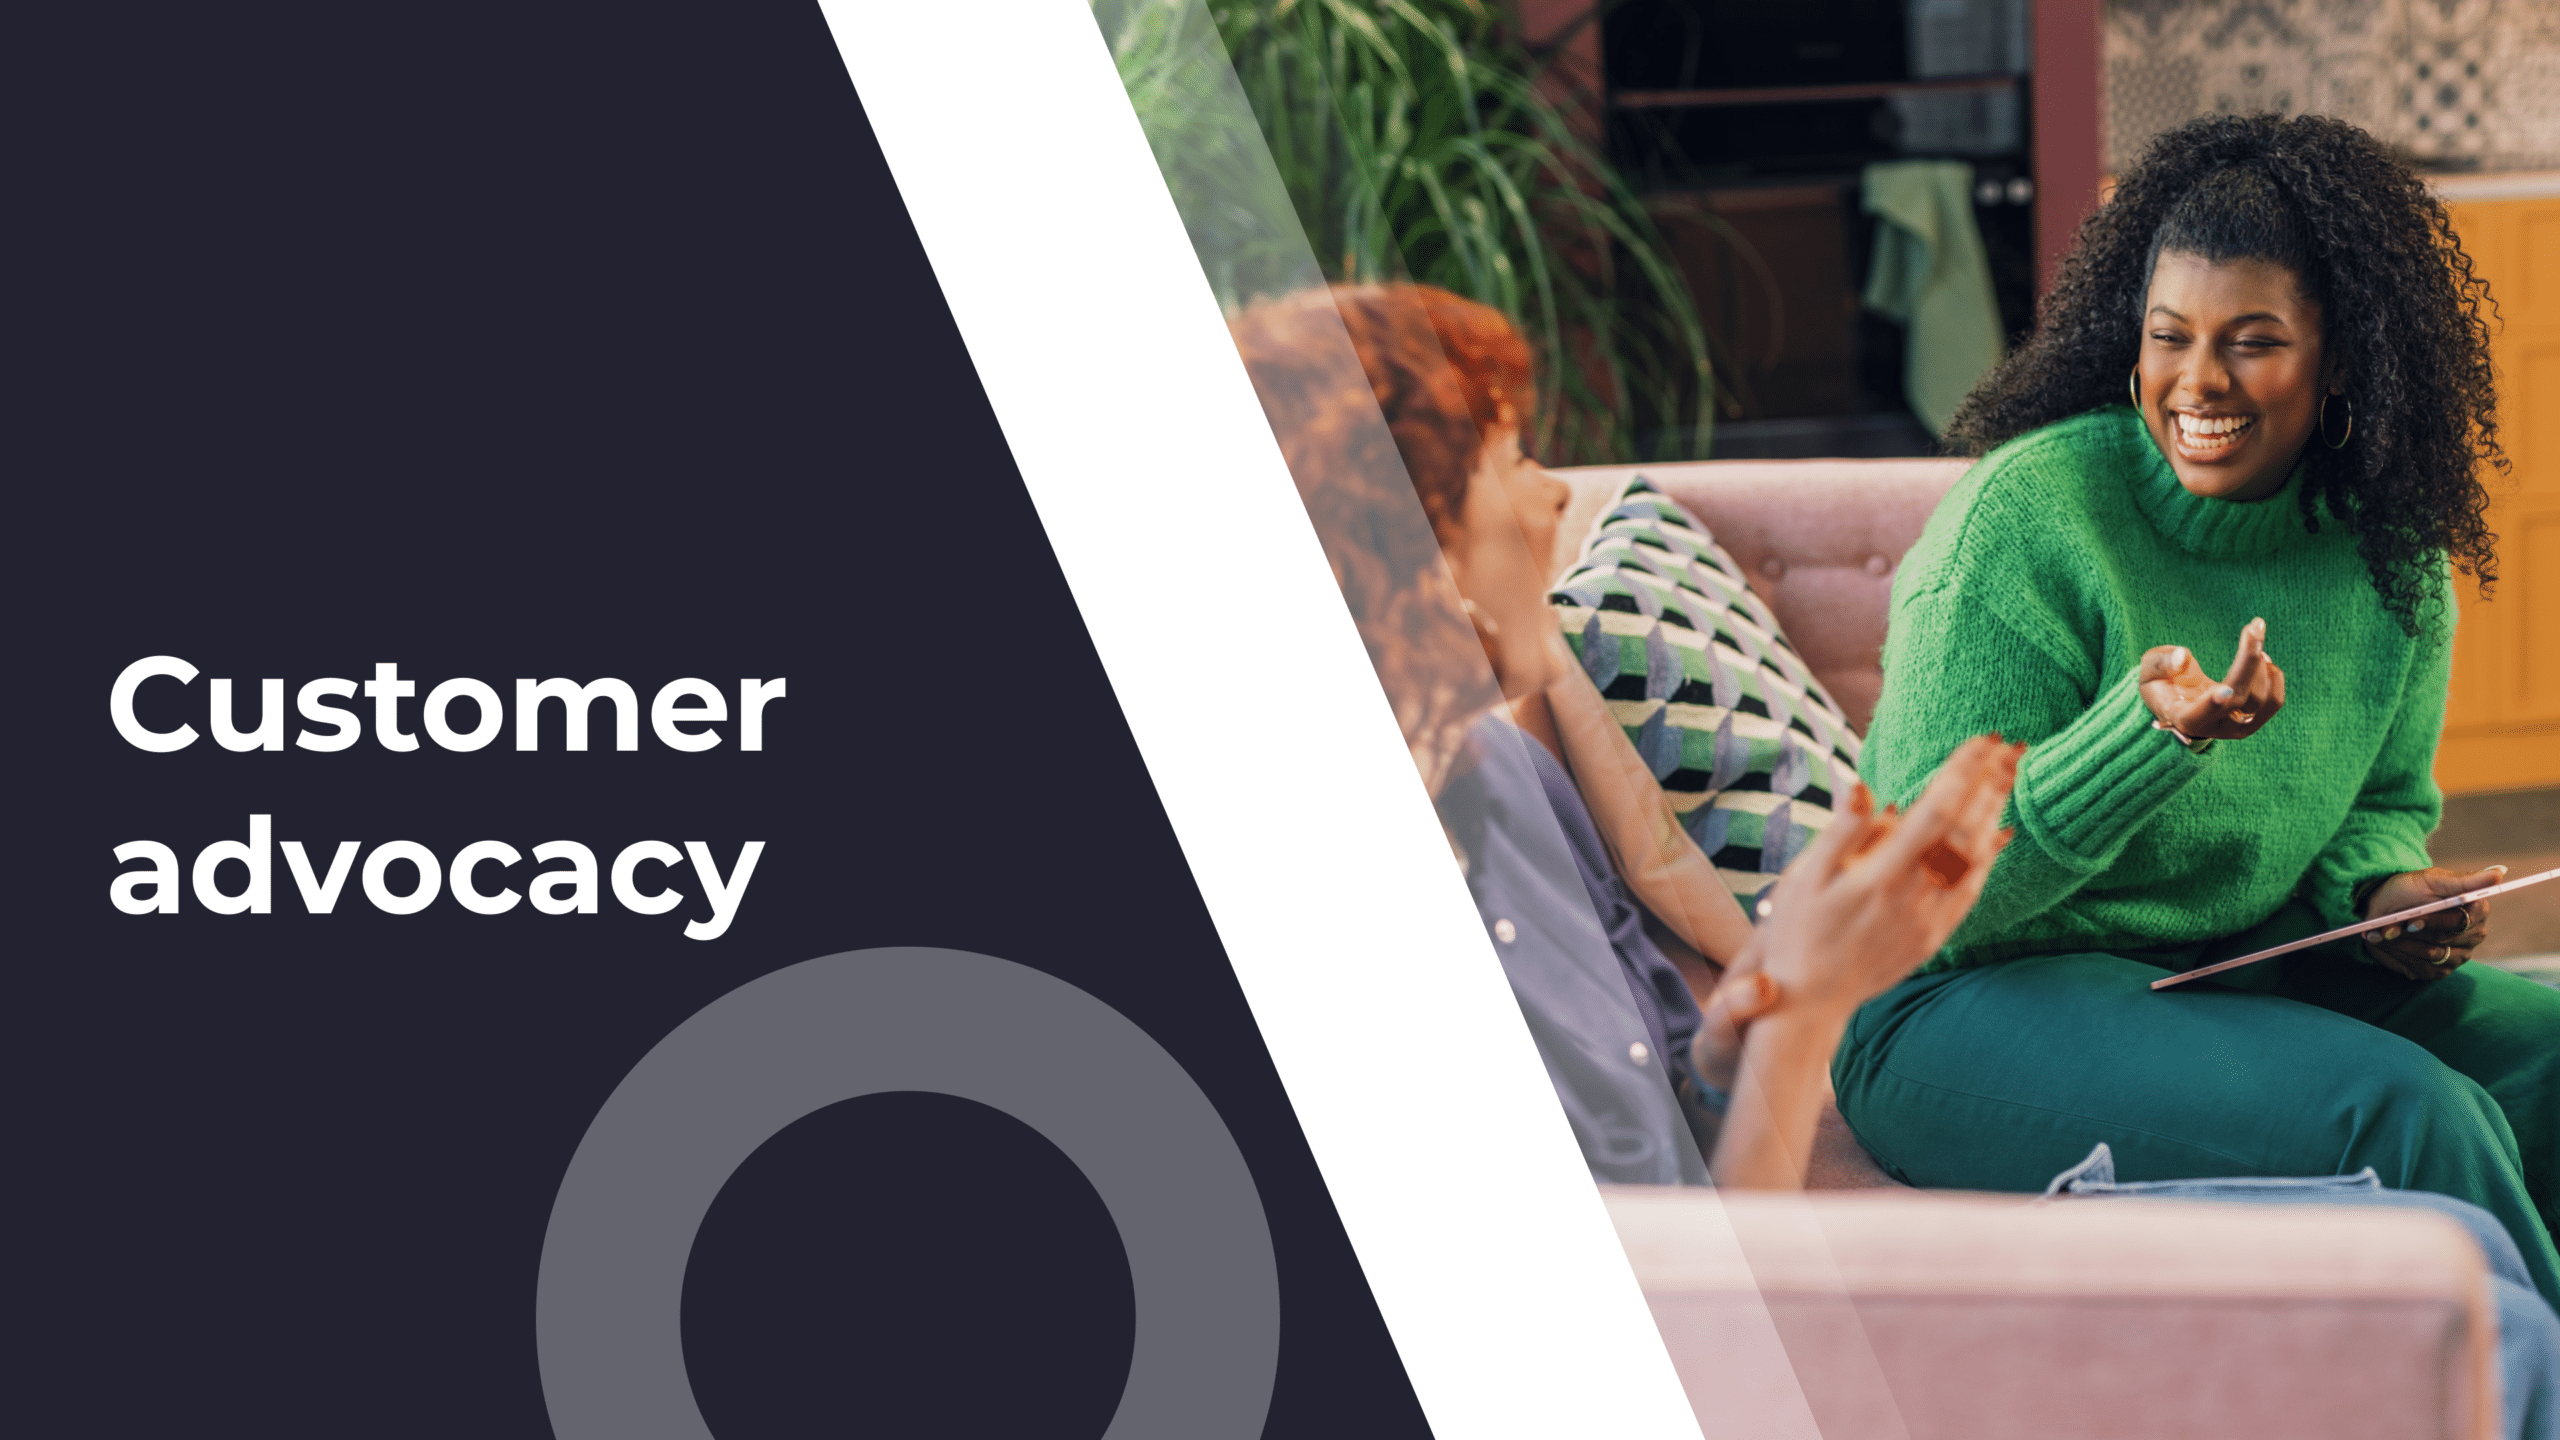 Customer Advocacy: Why It’s Important & How to Nurture Your Customers Advocates